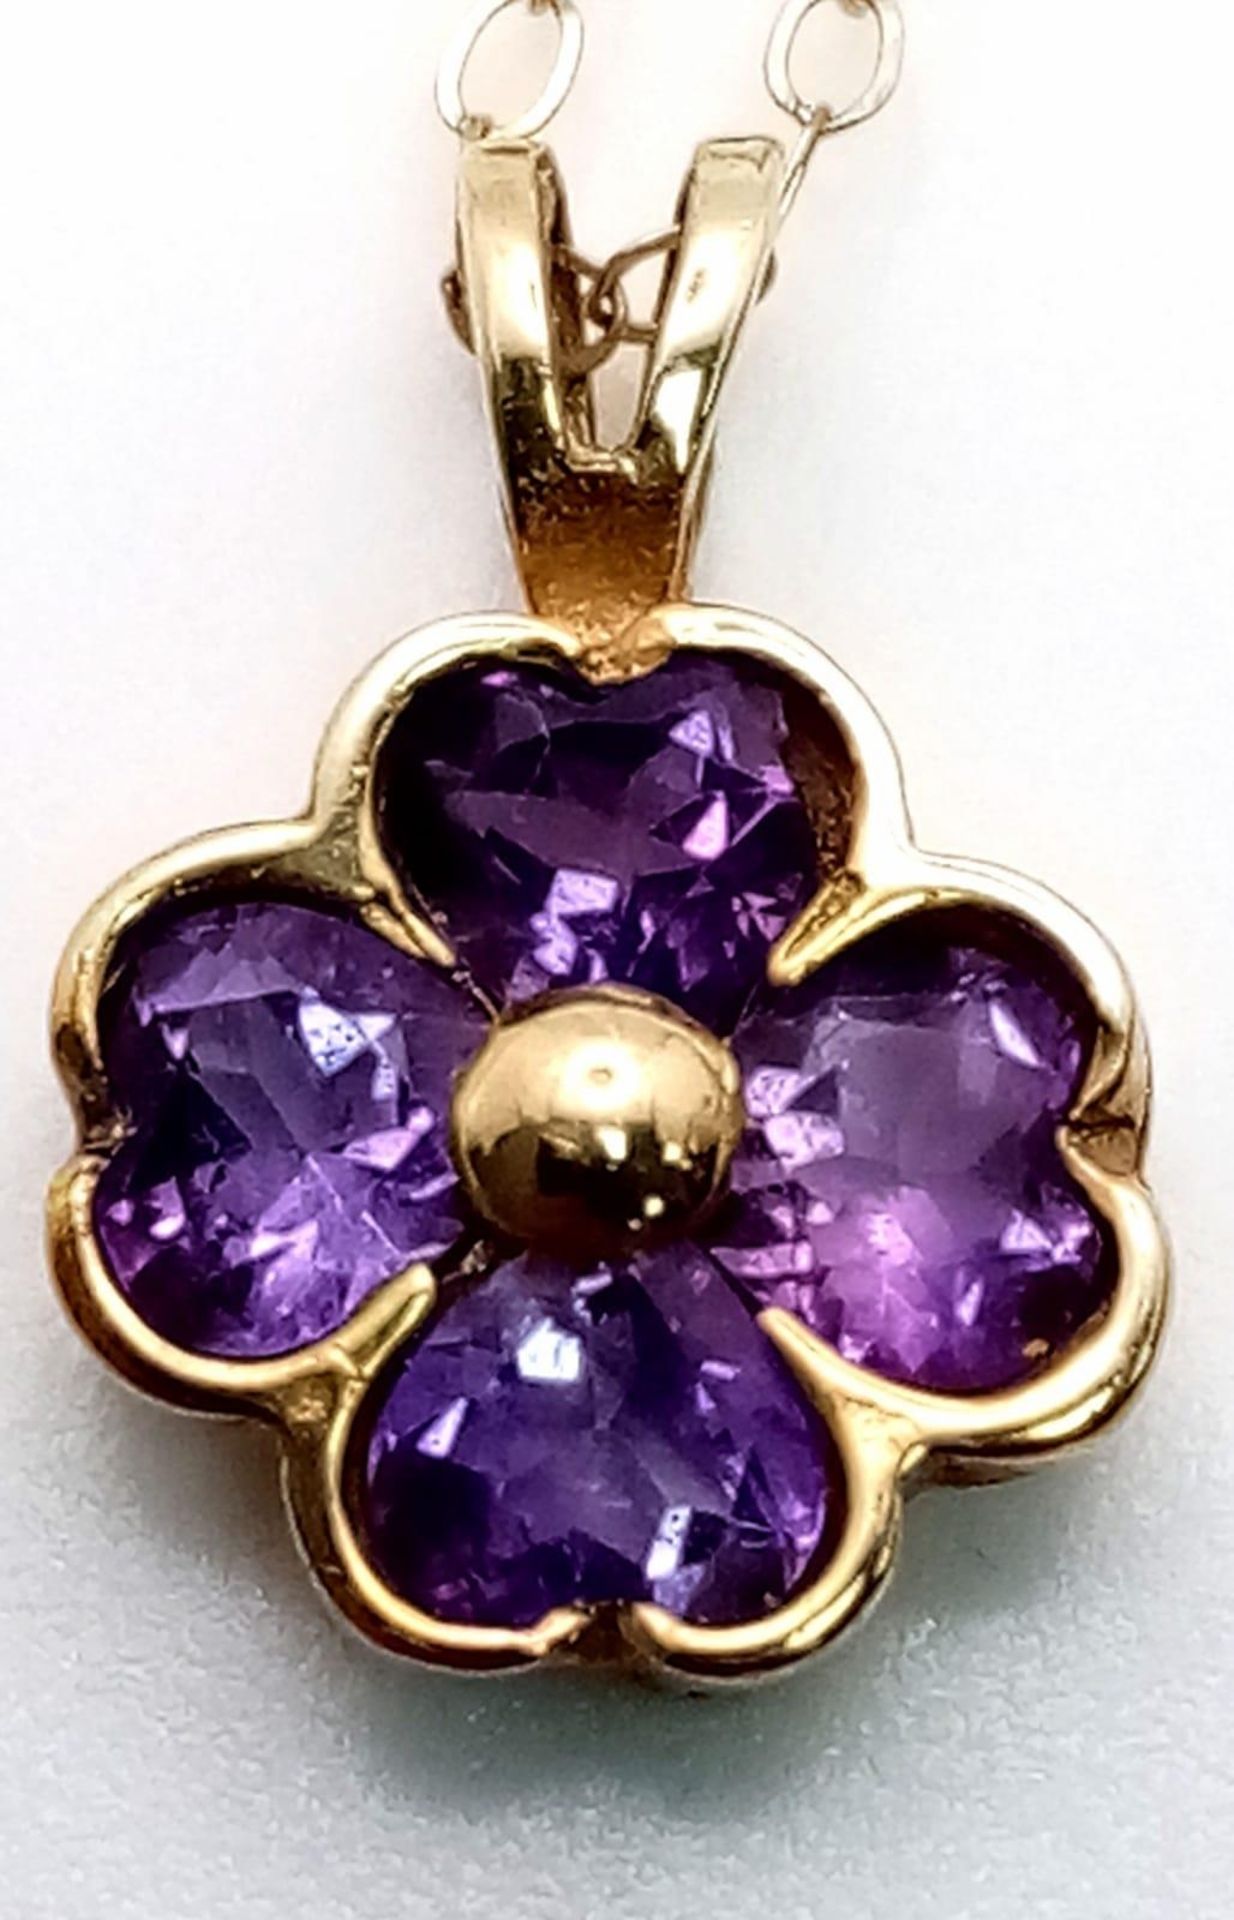 A pretty 9K Yellow Gold (tested as) Amethyst Flower pendant on Necklace, 1.3g total weight, 18” - Image 2 of 9